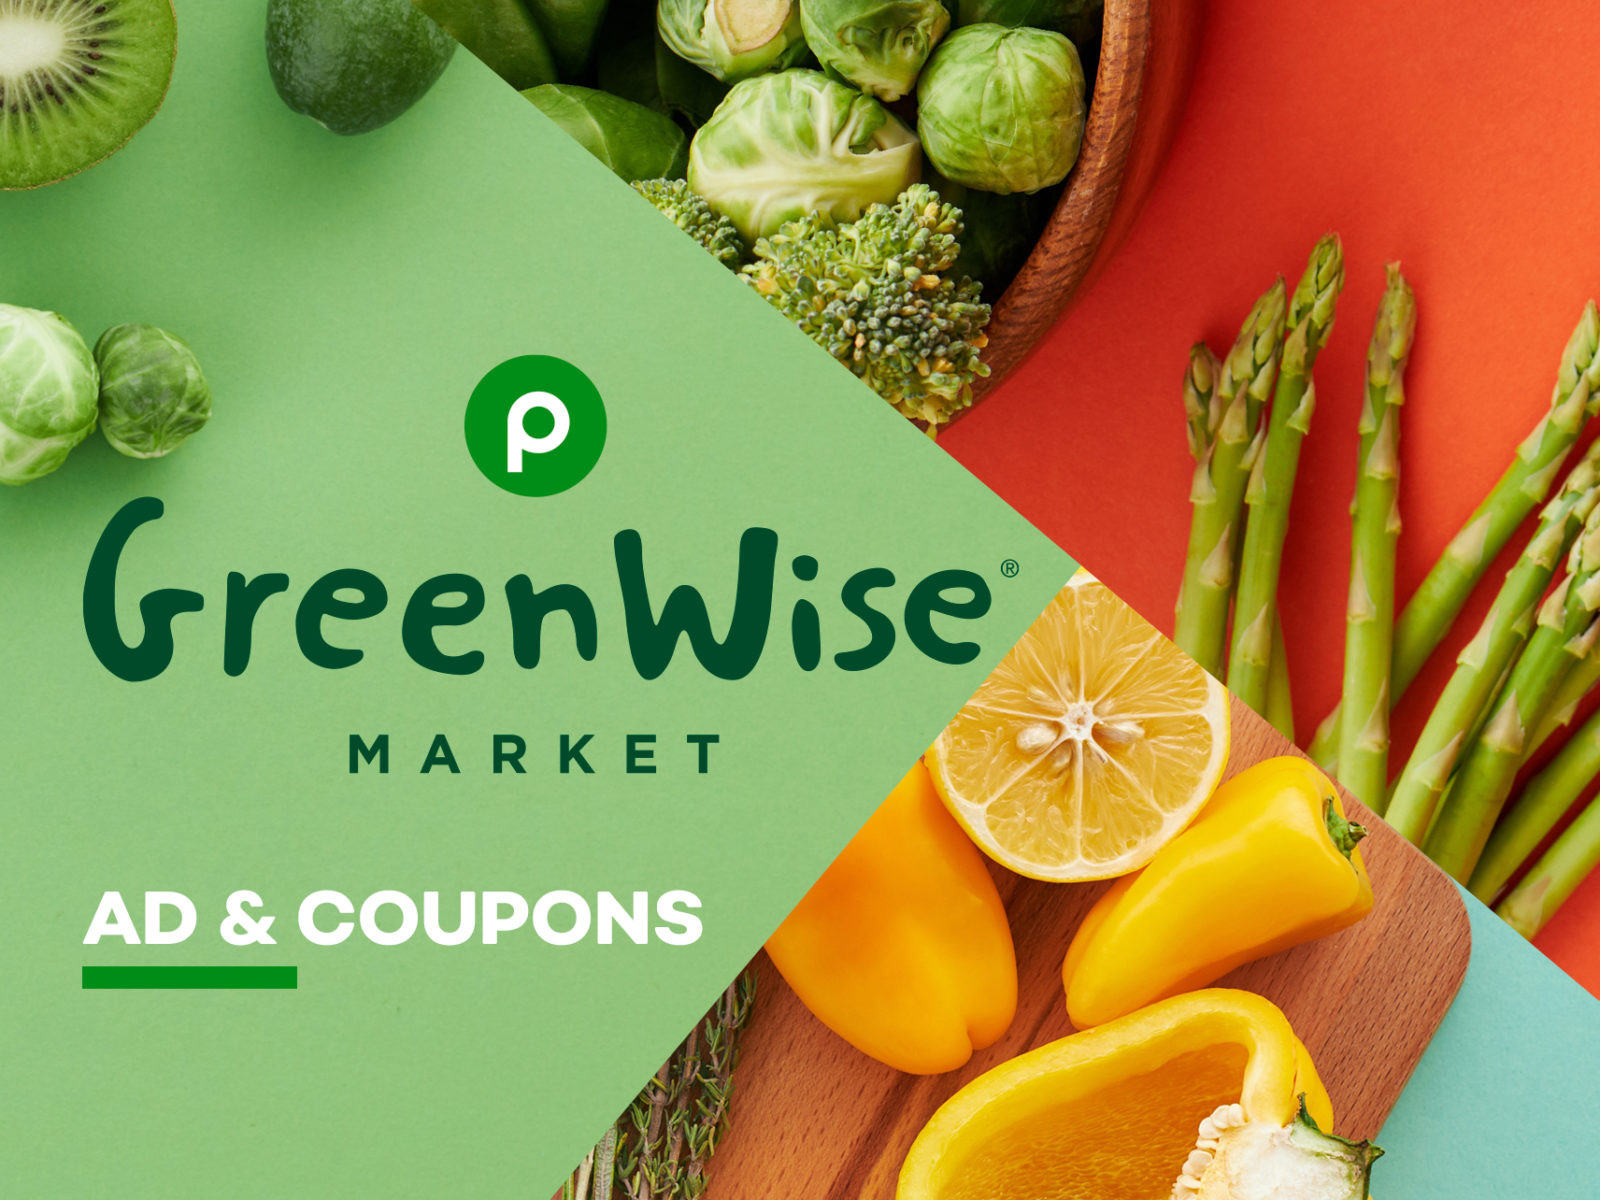 Publix GreenWise Market Ad & Coupons Week Of 9/28 to 10/4 (9/27 to 10/3 For Some)